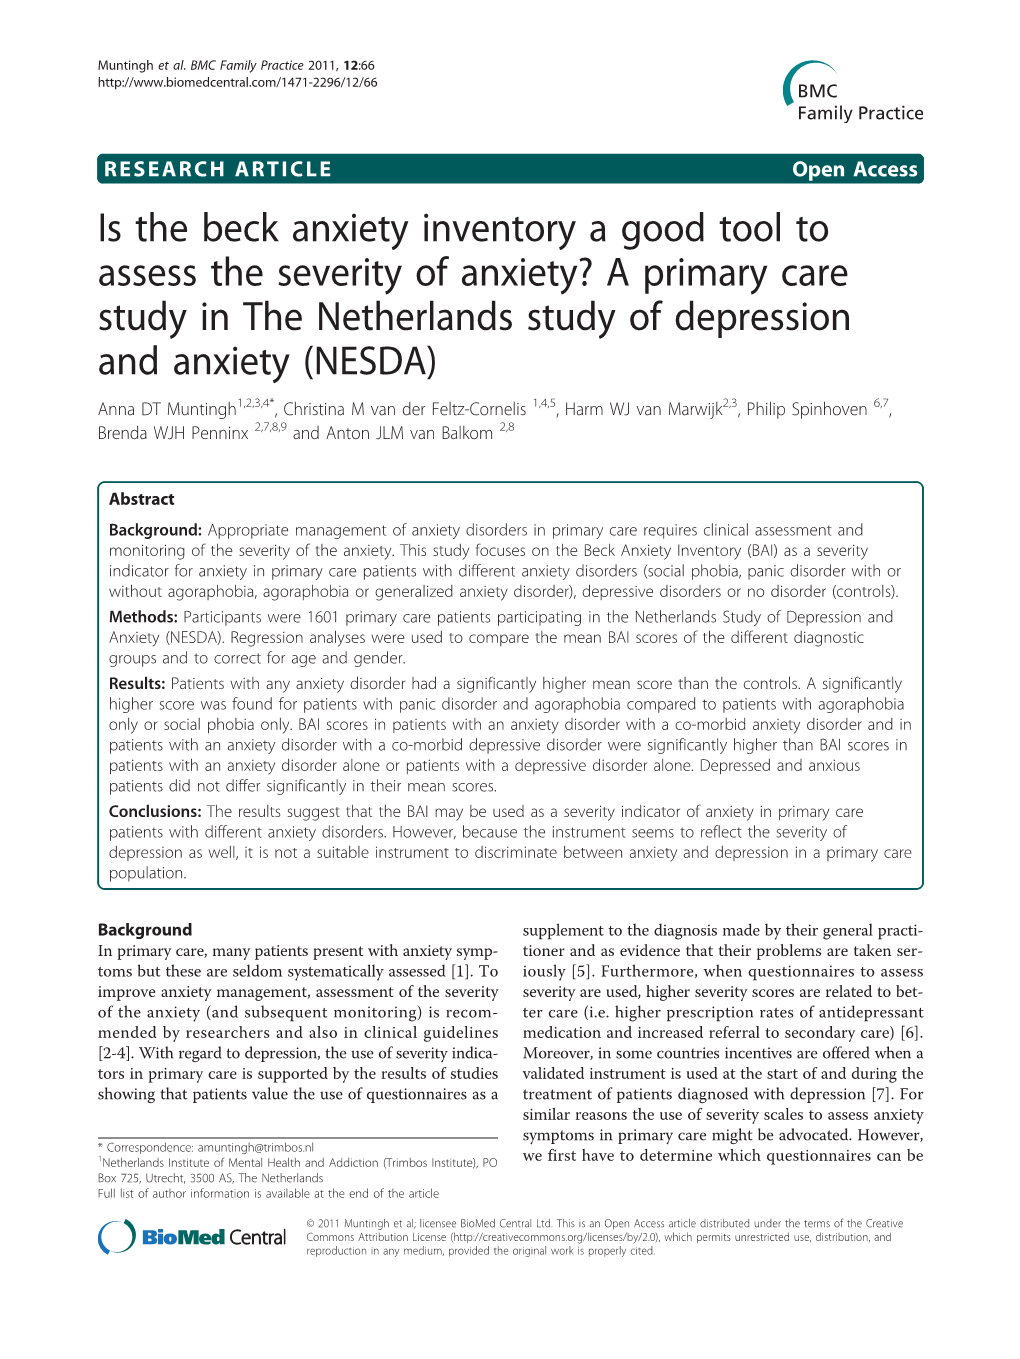 A Primary Care Study in the Netherlands Study of Depression and Anxiety